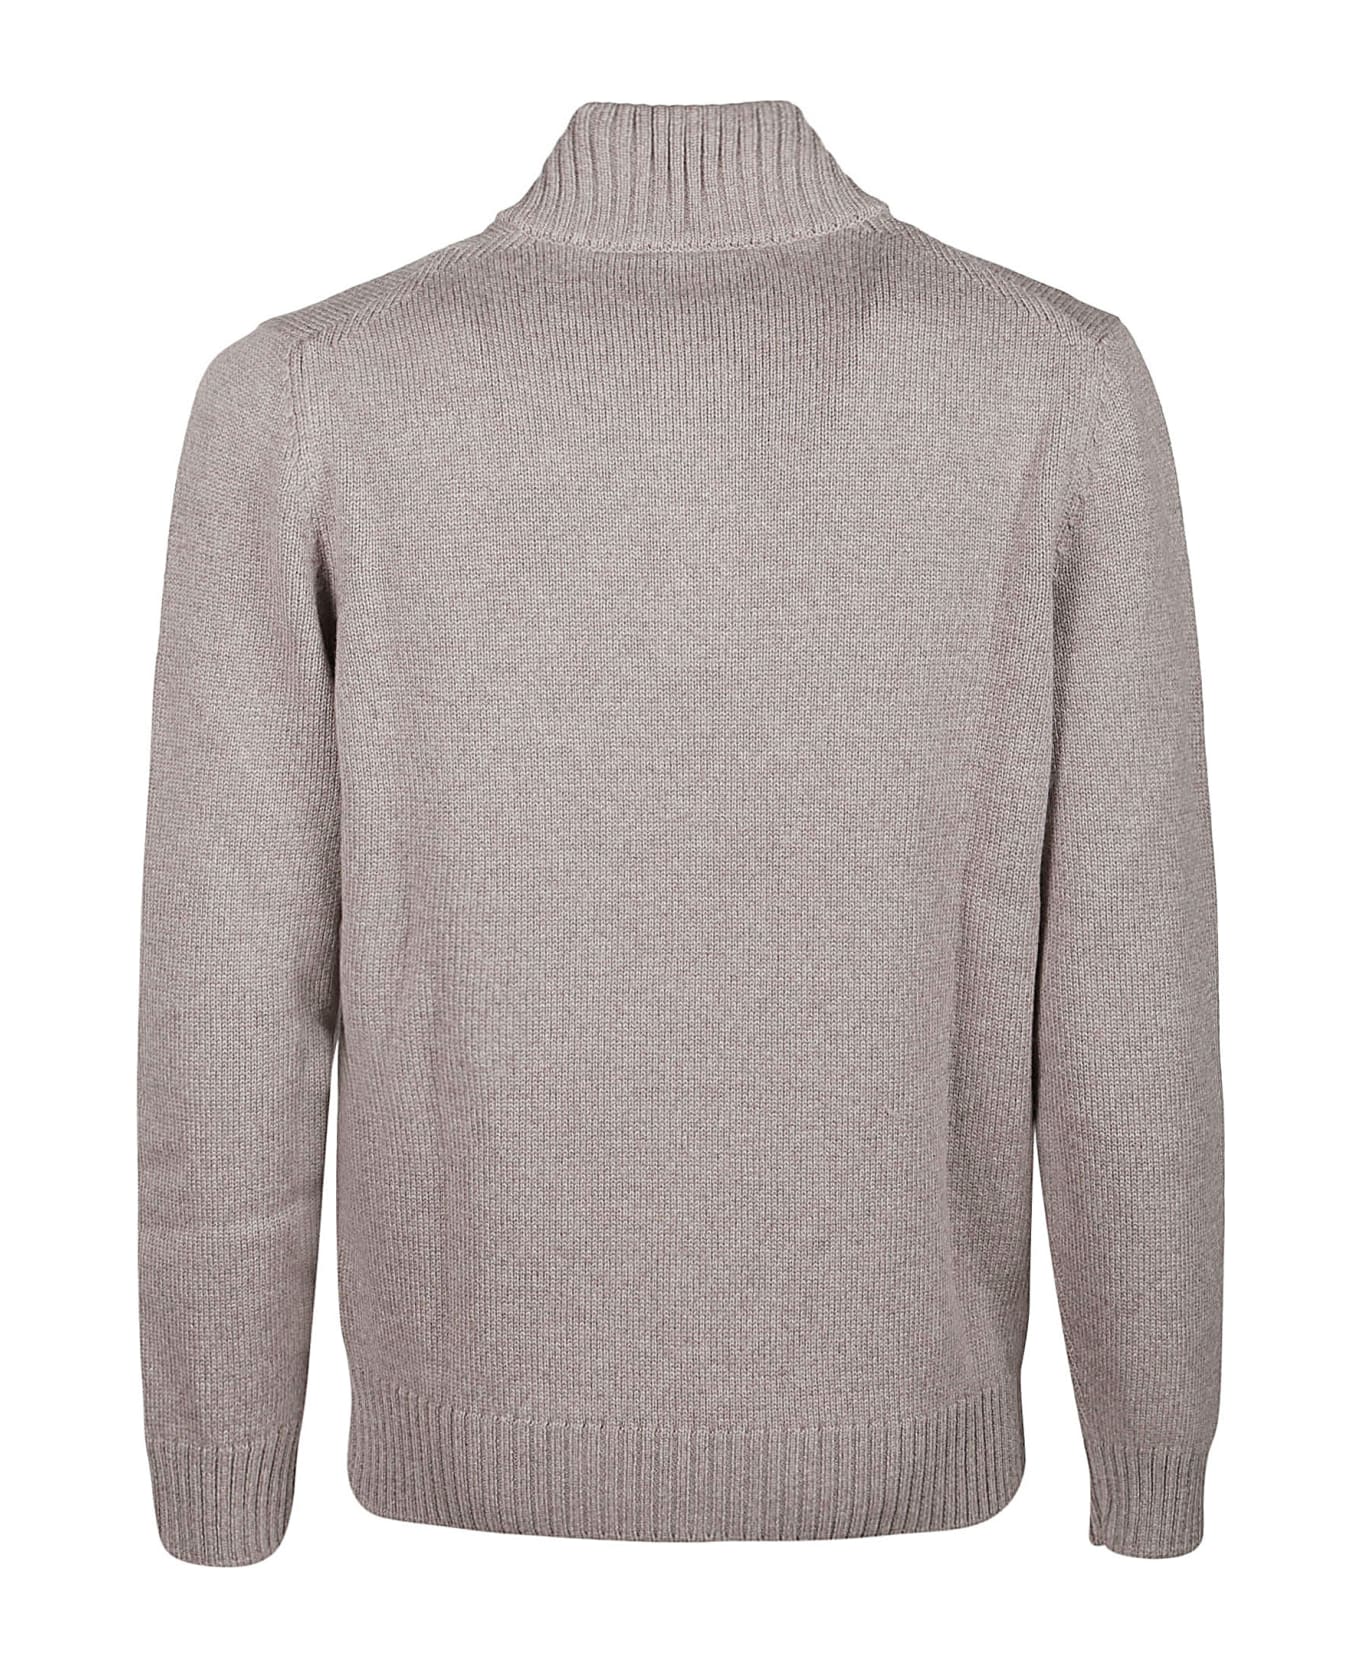 Fay Turtleneck Sweater - BROWN